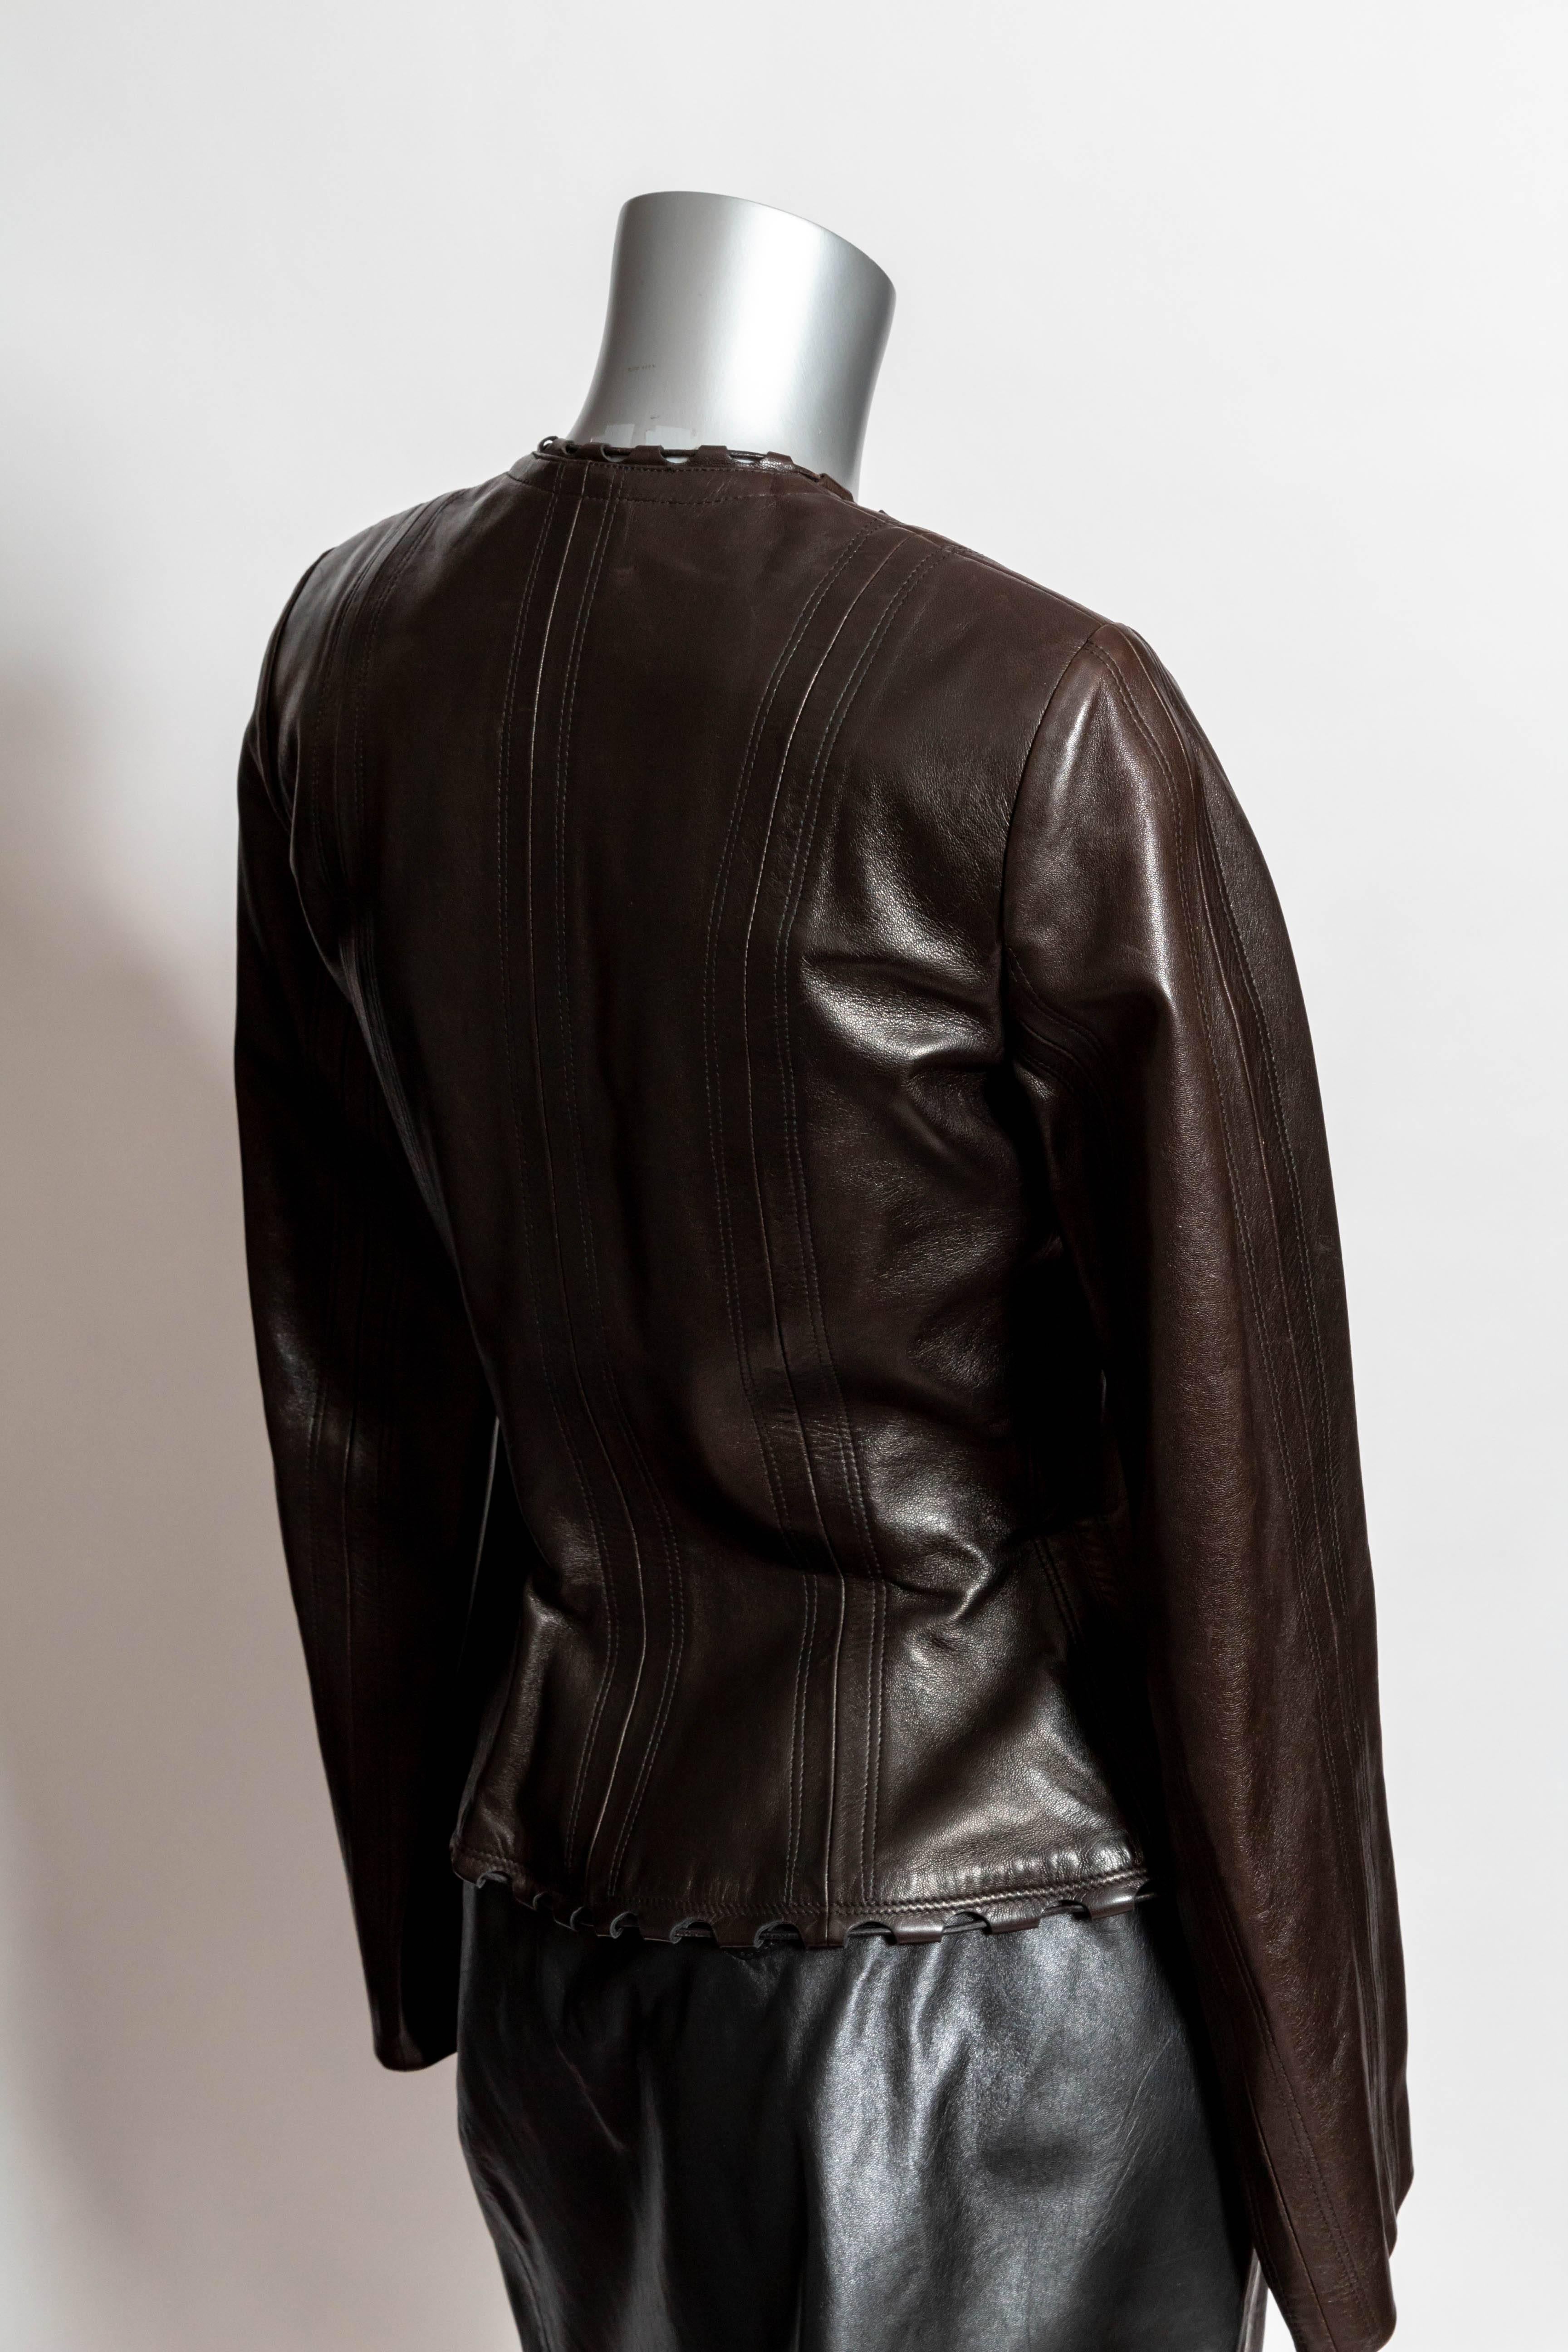 Azzedine Alaia Vintage Brown Leather Jacket with Zip Closure - 40 / XS 3